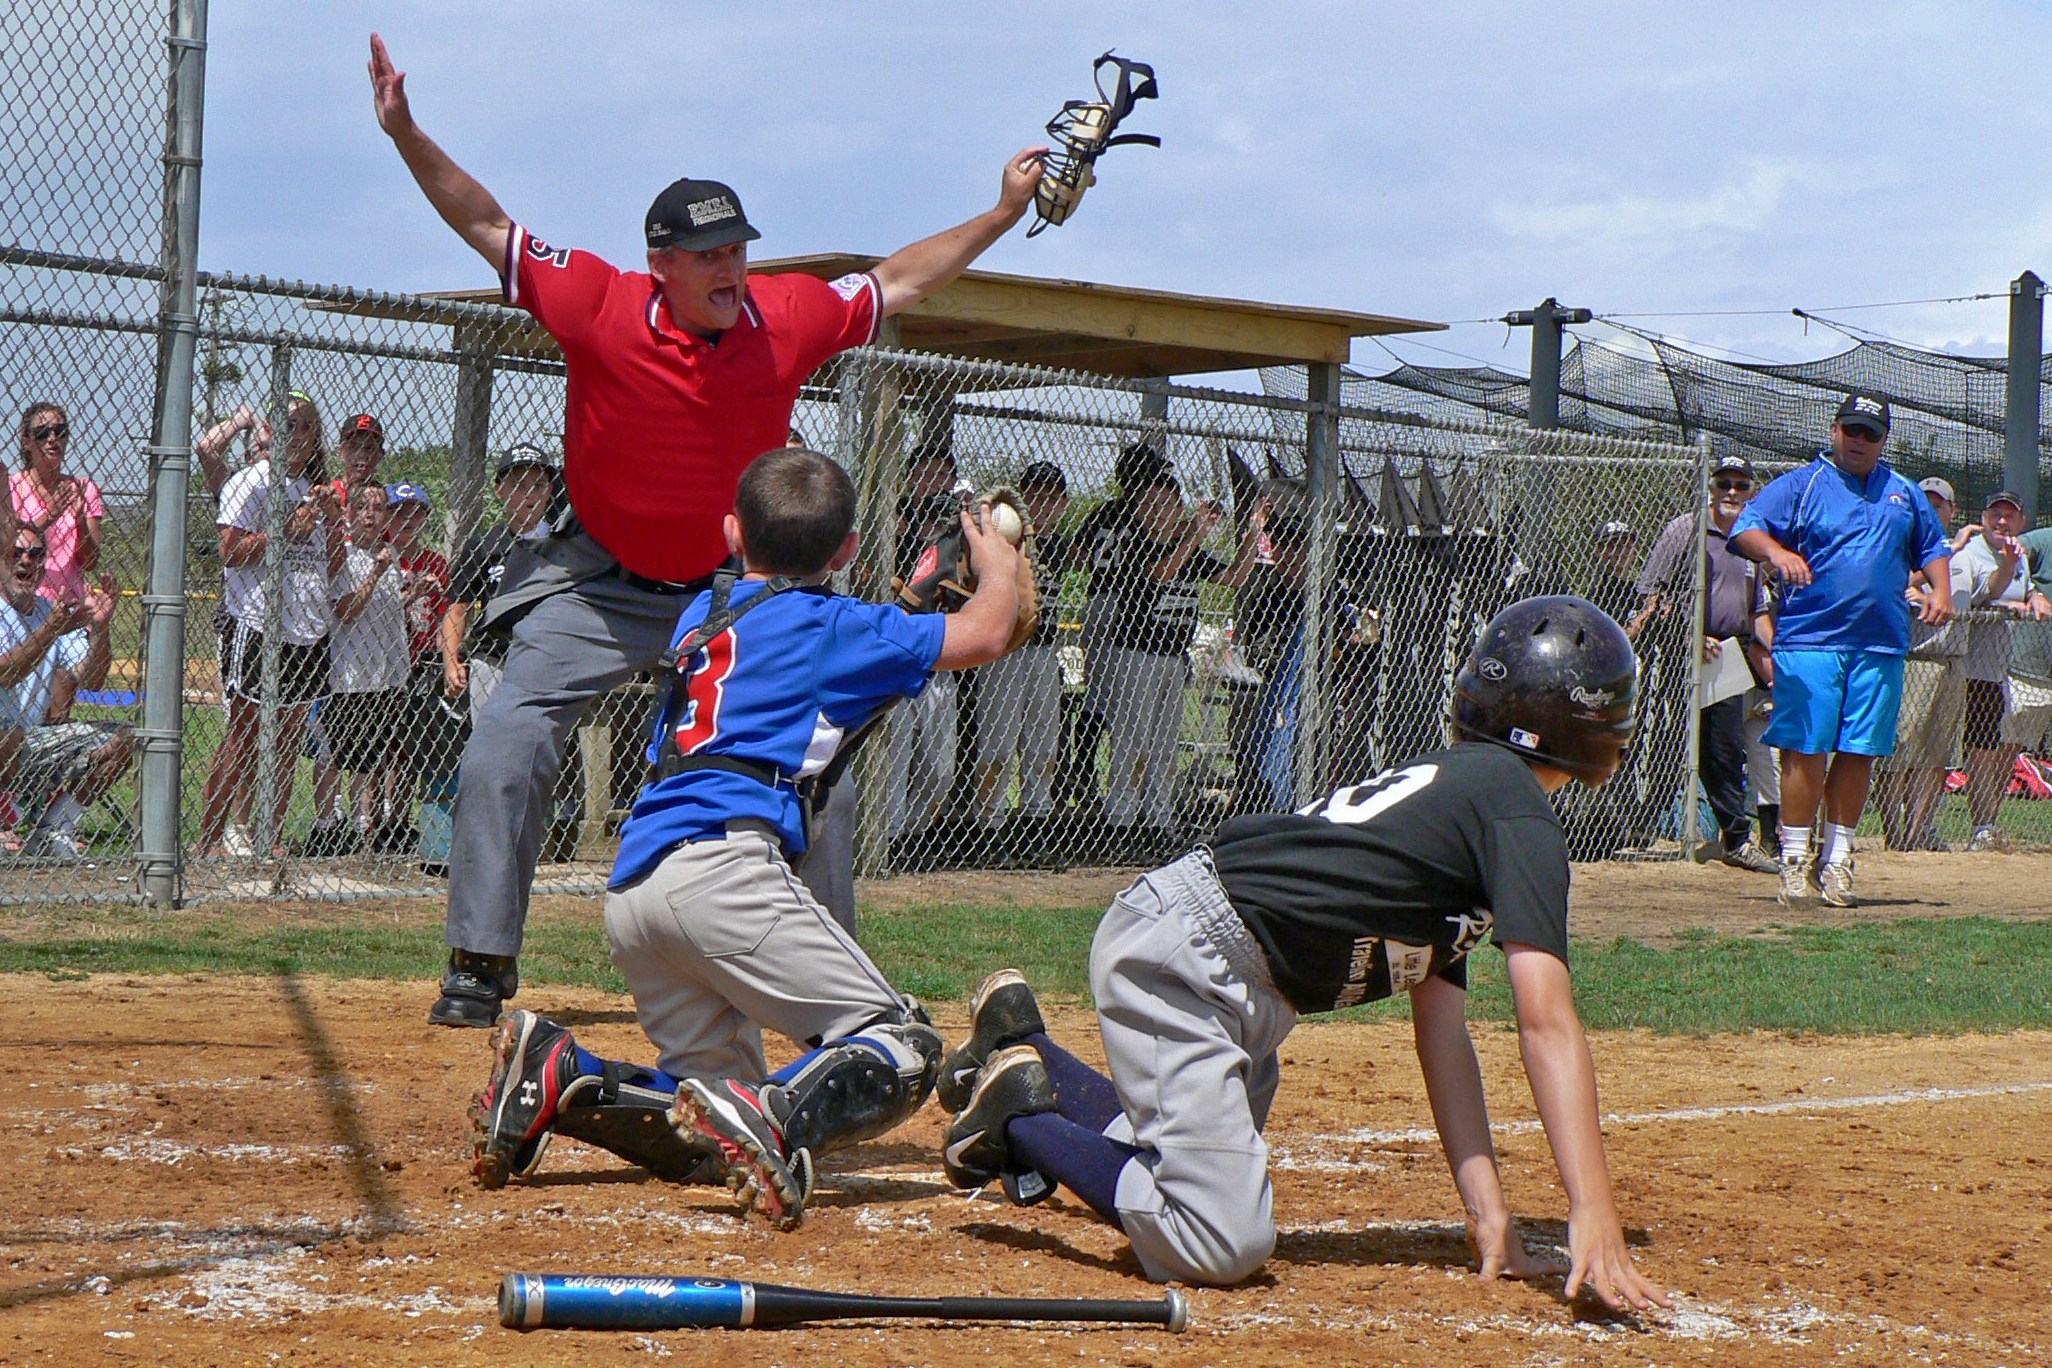 Safe – There’s No Arguing with the Ump